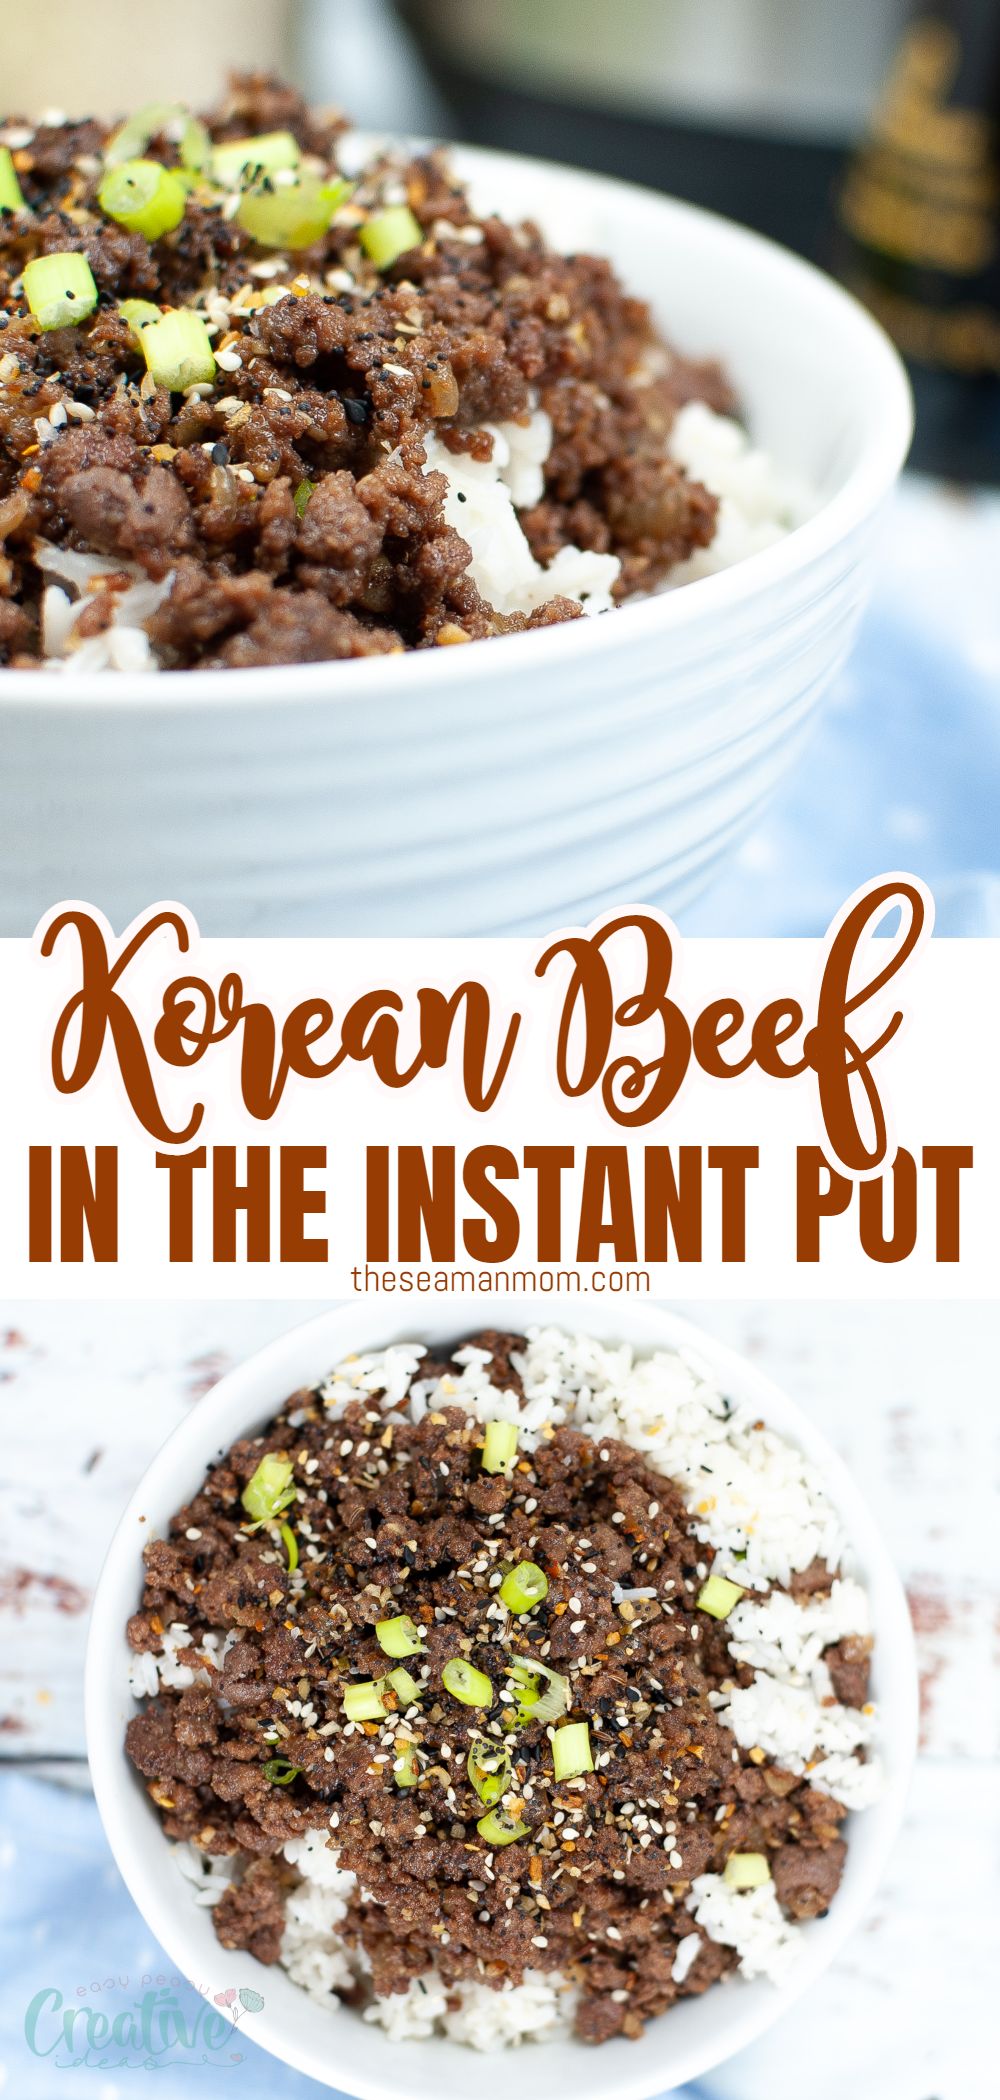 Have you been craving Korean food? Instant Pot Korean Beef is a simple homestyle recipe that doesn't take much time to make and tastes amazing. It's an easy Instant Pot meal the whole family will love! via @petroneagu